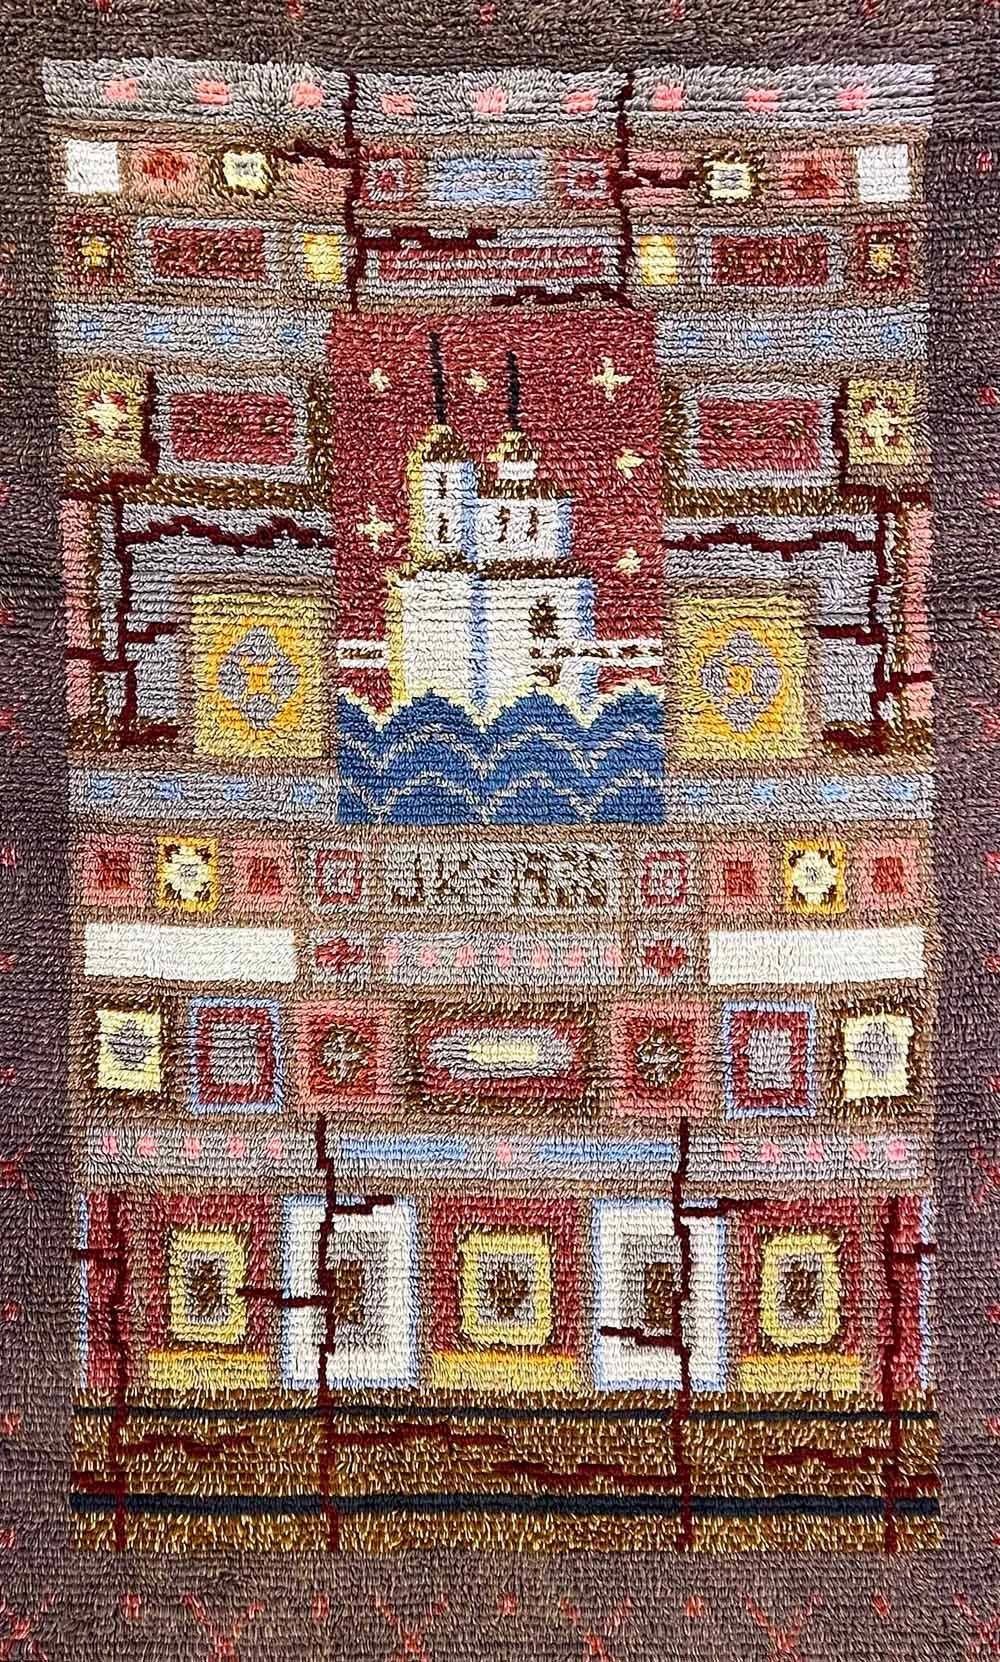 Unique and striking, this long pile ryijy rug designed by Pia Katerma in Finland depicts Kajaani Castle at the center of the Coat of Arms of Kajaani, surrounded by geometric patterns and icons in rich, muted colors -- plum, deep red, purple and